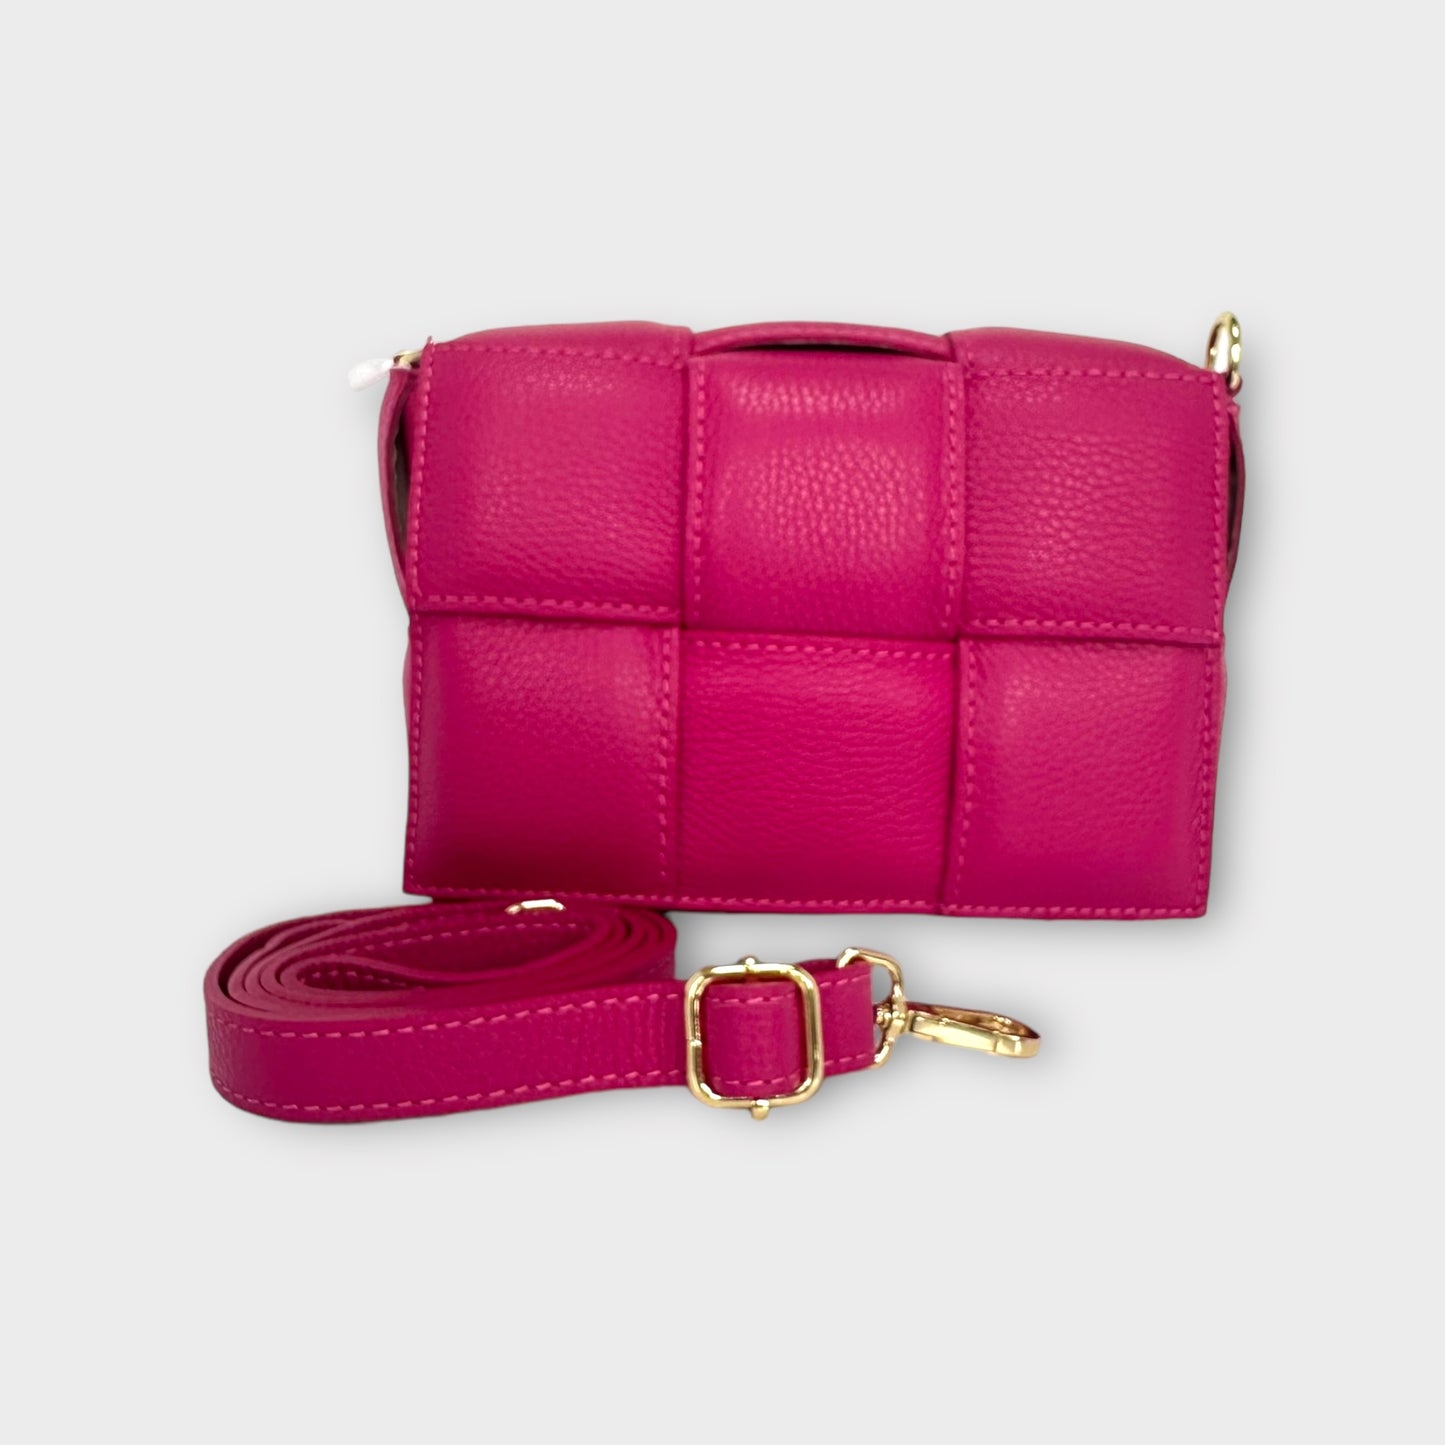 Rome - Woven Leather Cross body bag